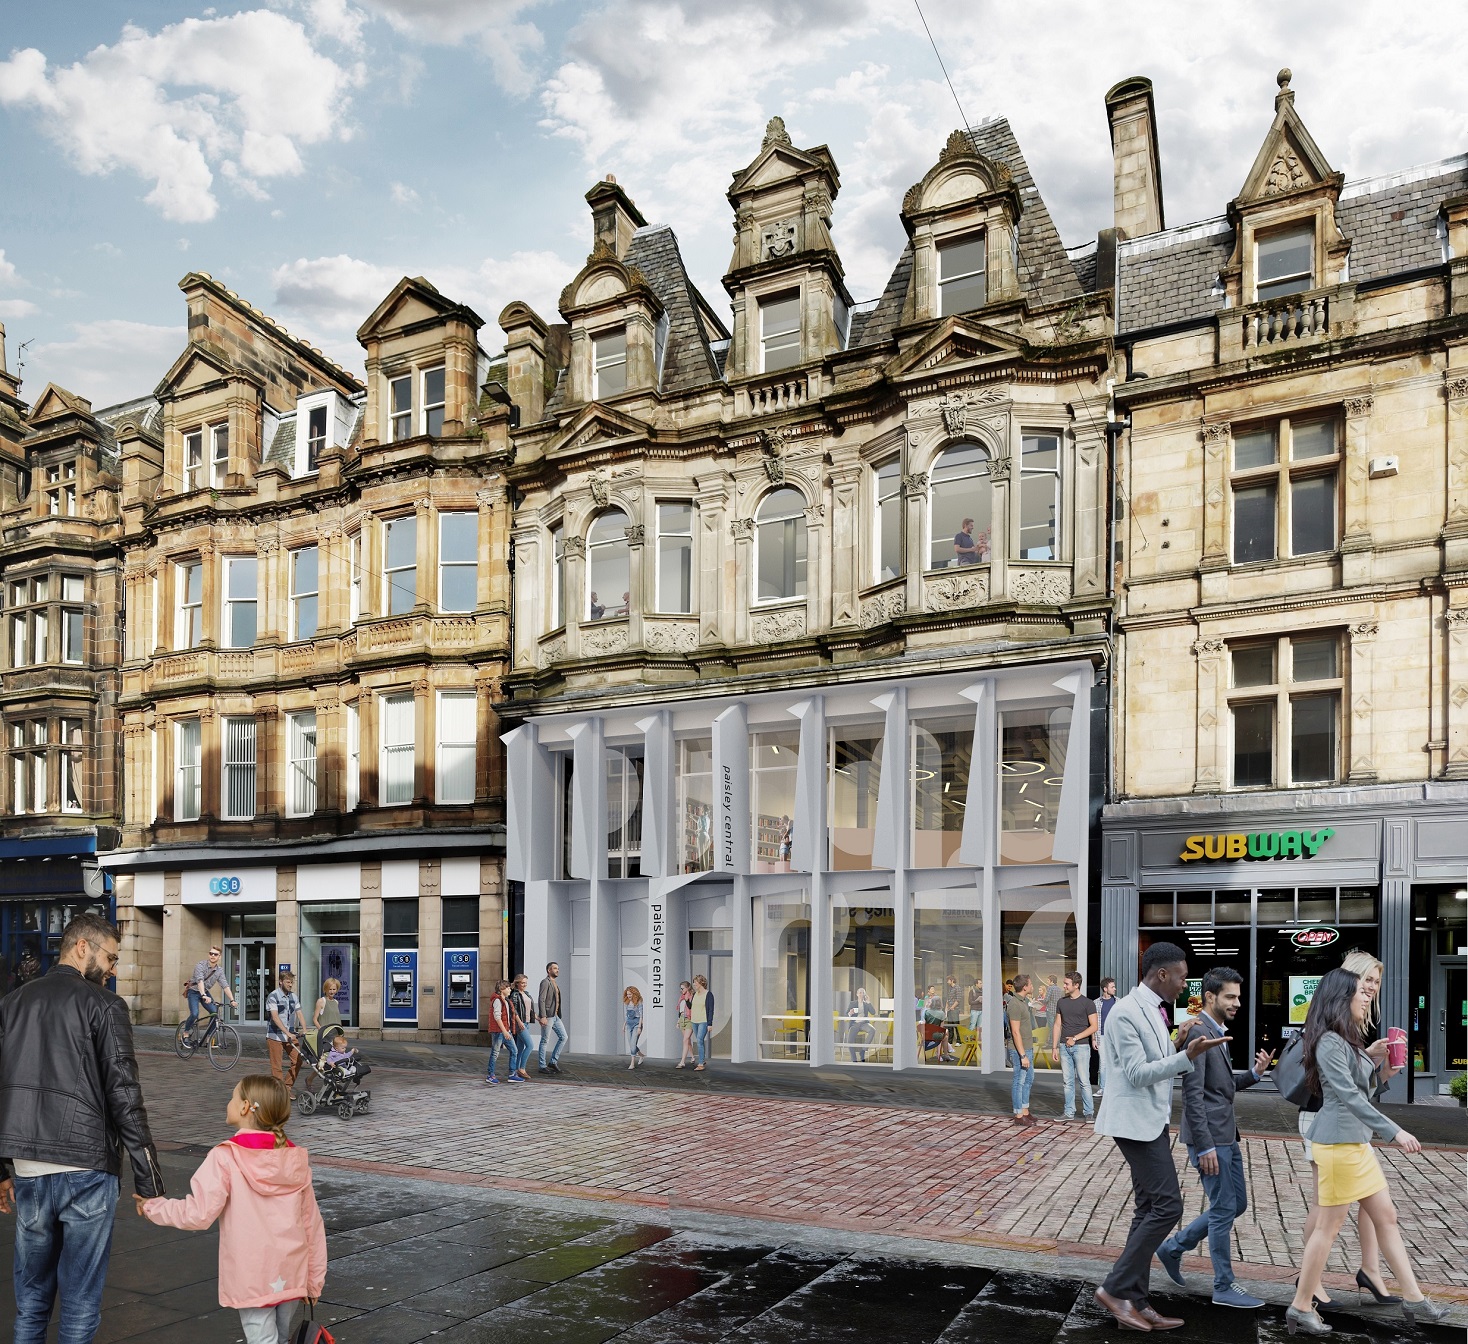 In Pictures: First images of new Paisley learning and cultural hub